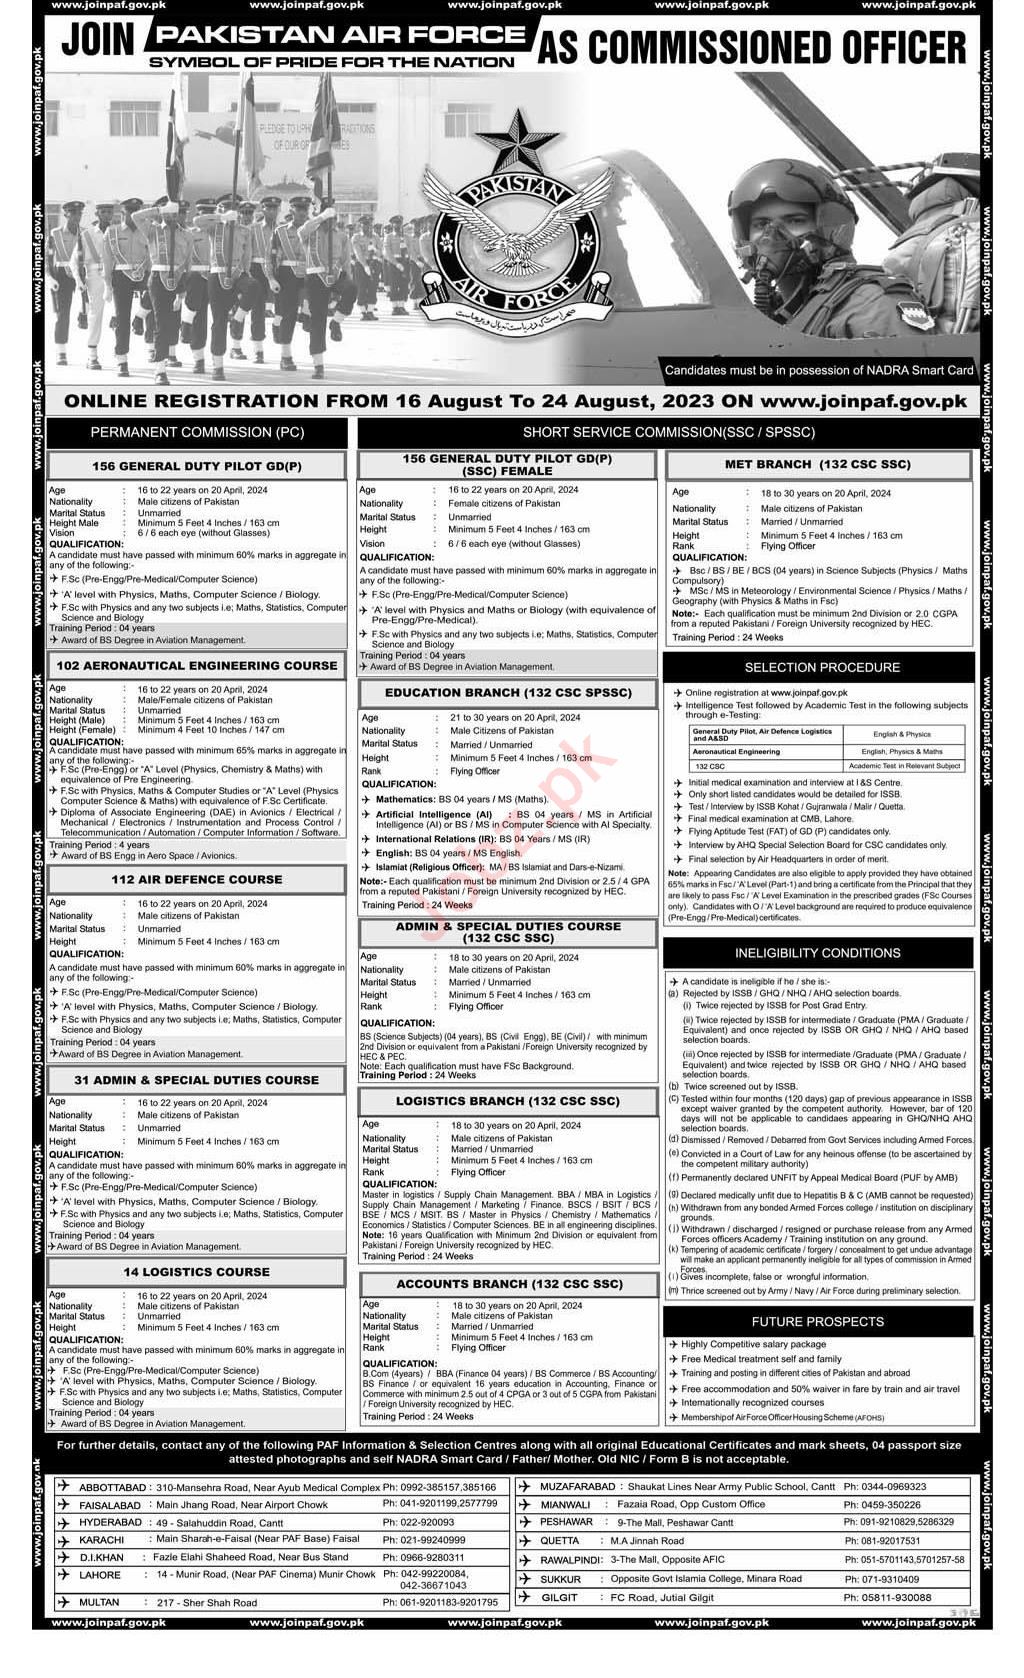 Pakistan Air Force PAF Air Force jobs in Lahore 2023